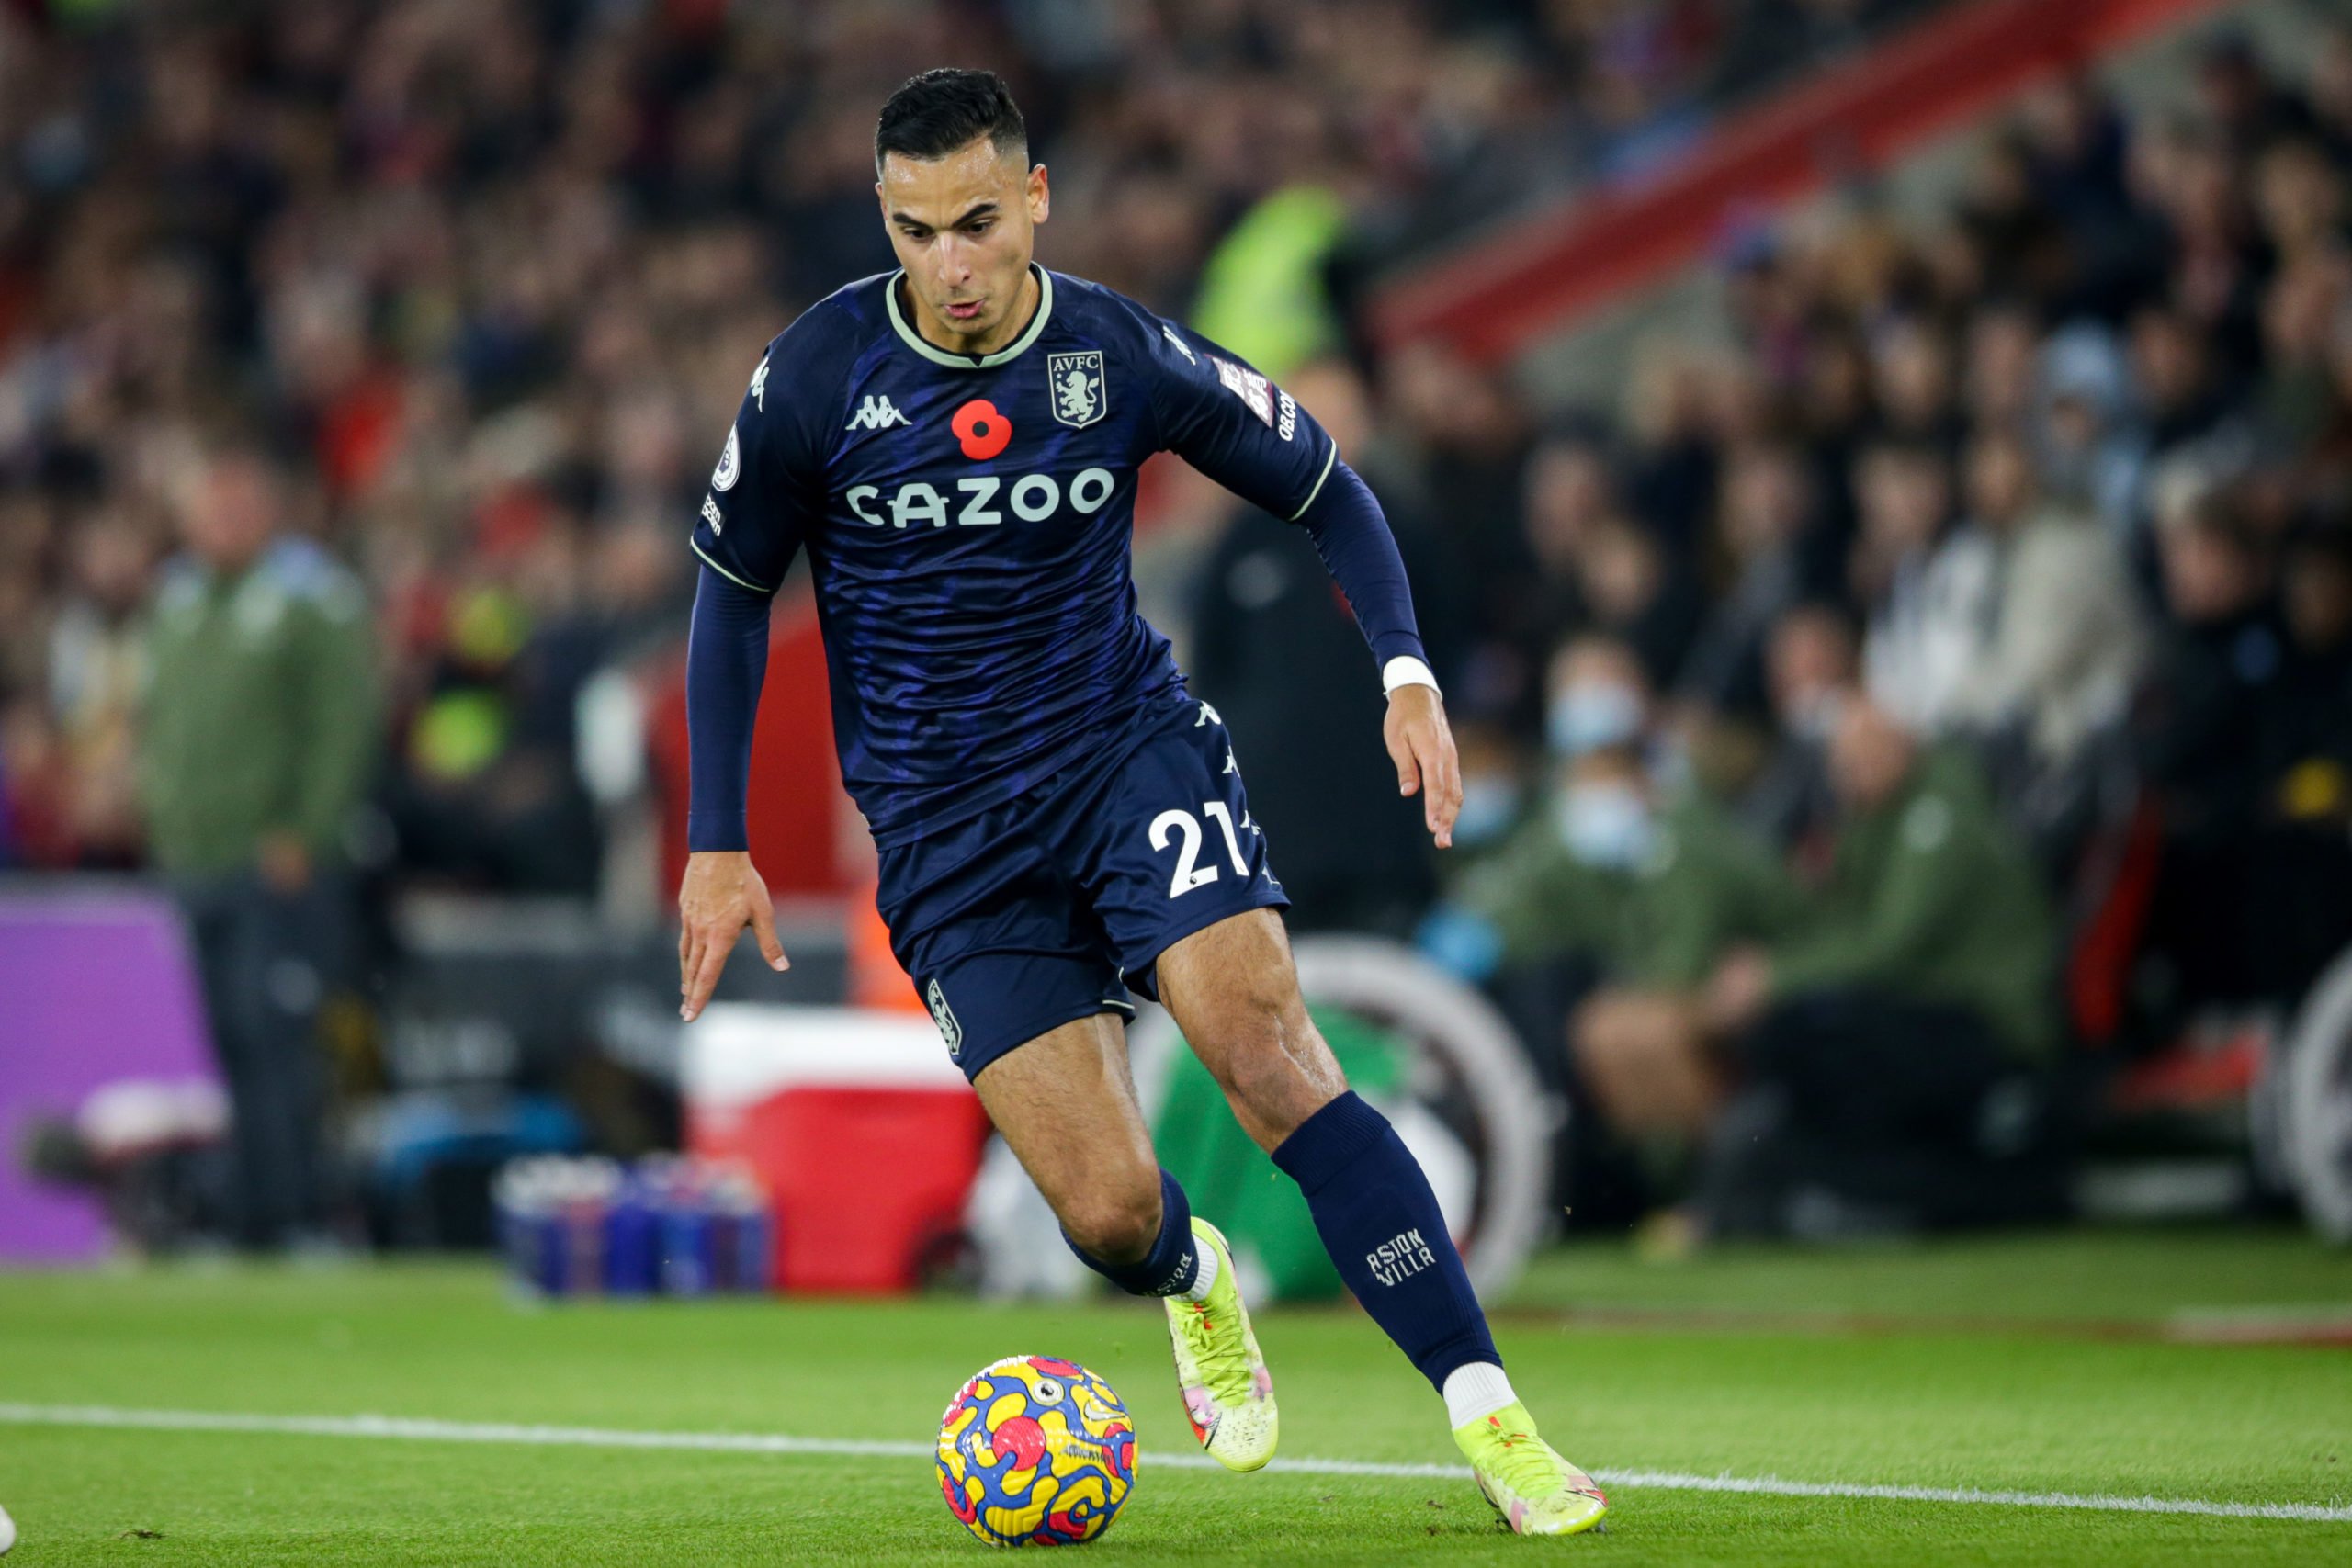 West Ham could try to sign Aston Villa ace Anwar El Ghazi in the January window